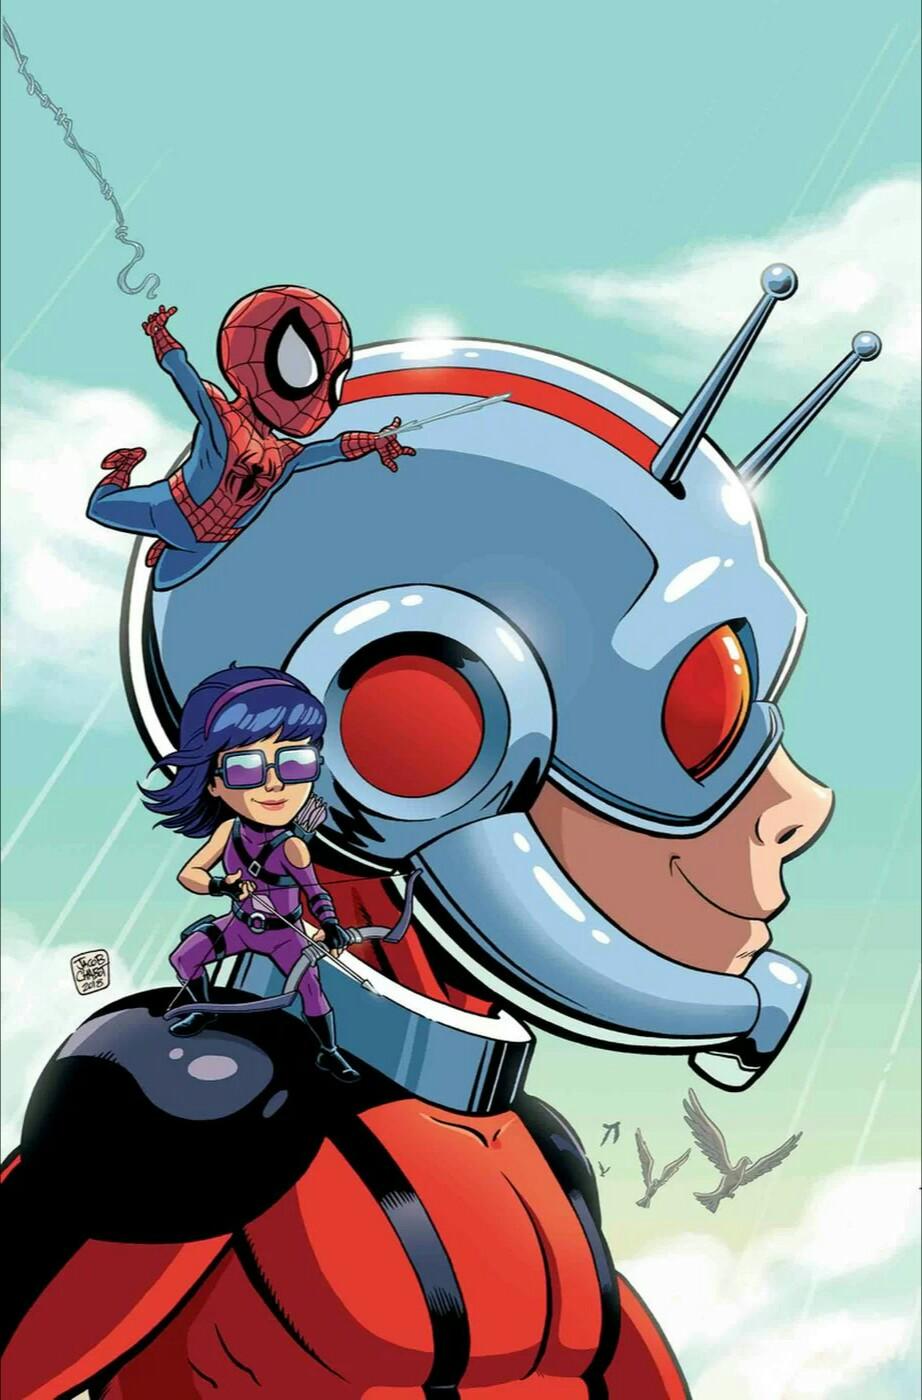 Marvel Super Hero Adventures: Webs and Arrows and Ants, Oh My! Vol. 1 #1